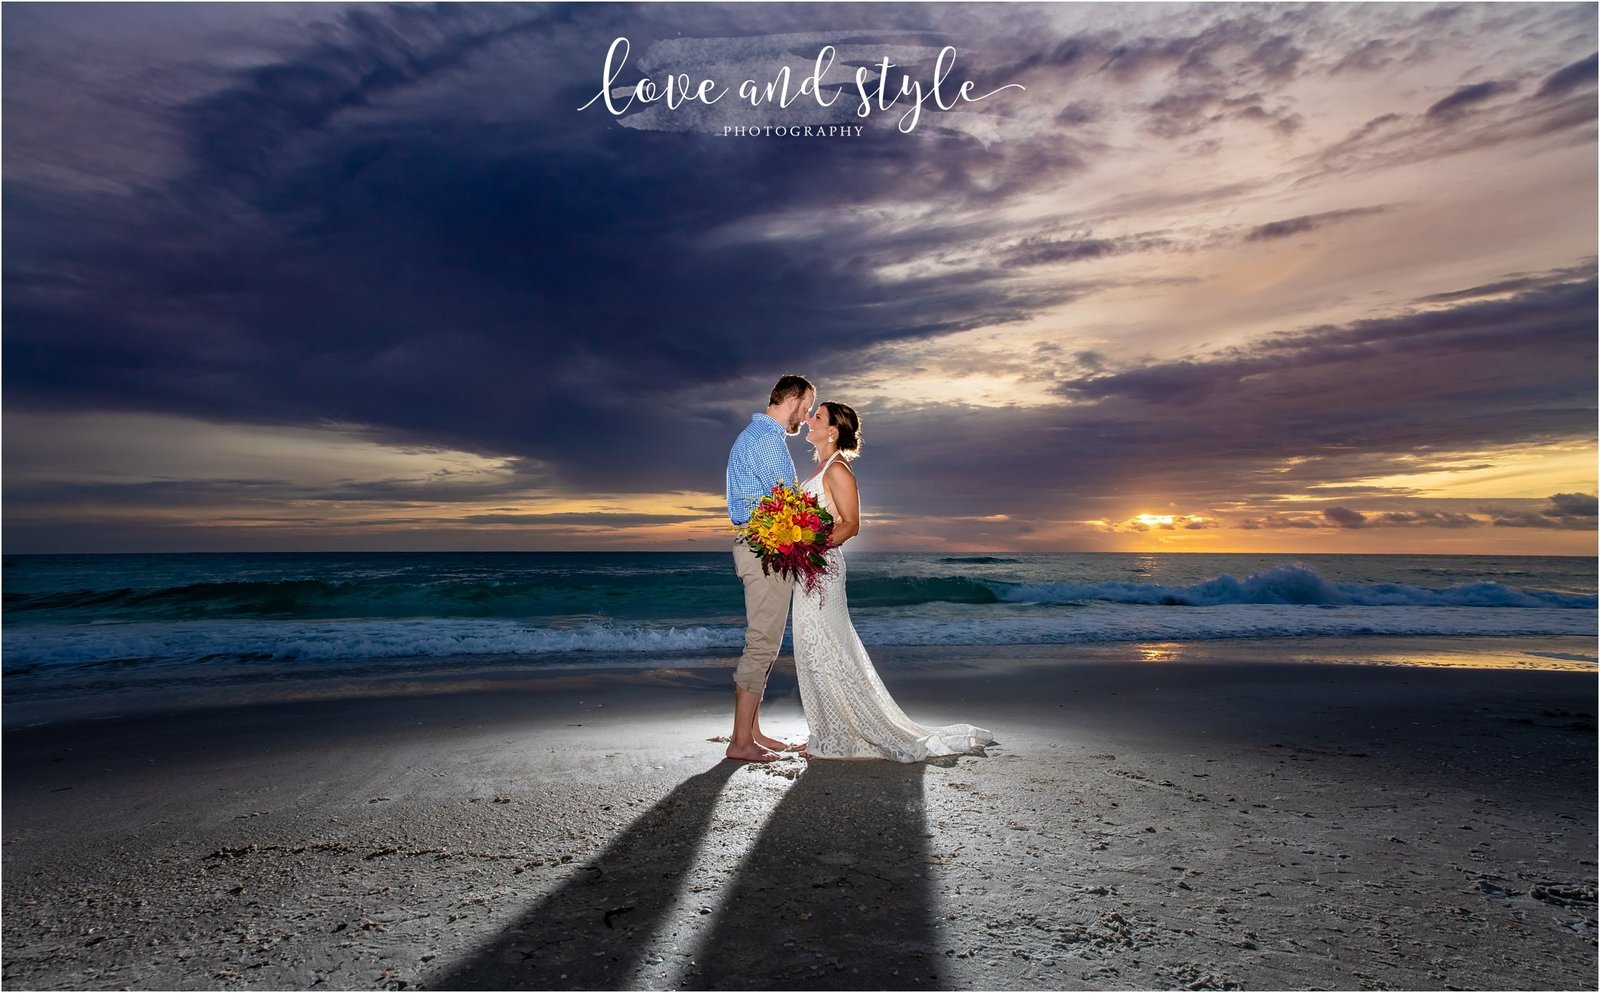 Bride and Groom backlit at Sunset on Holmes Beach in front of The Beach House Restaurant on Anna Maria Island